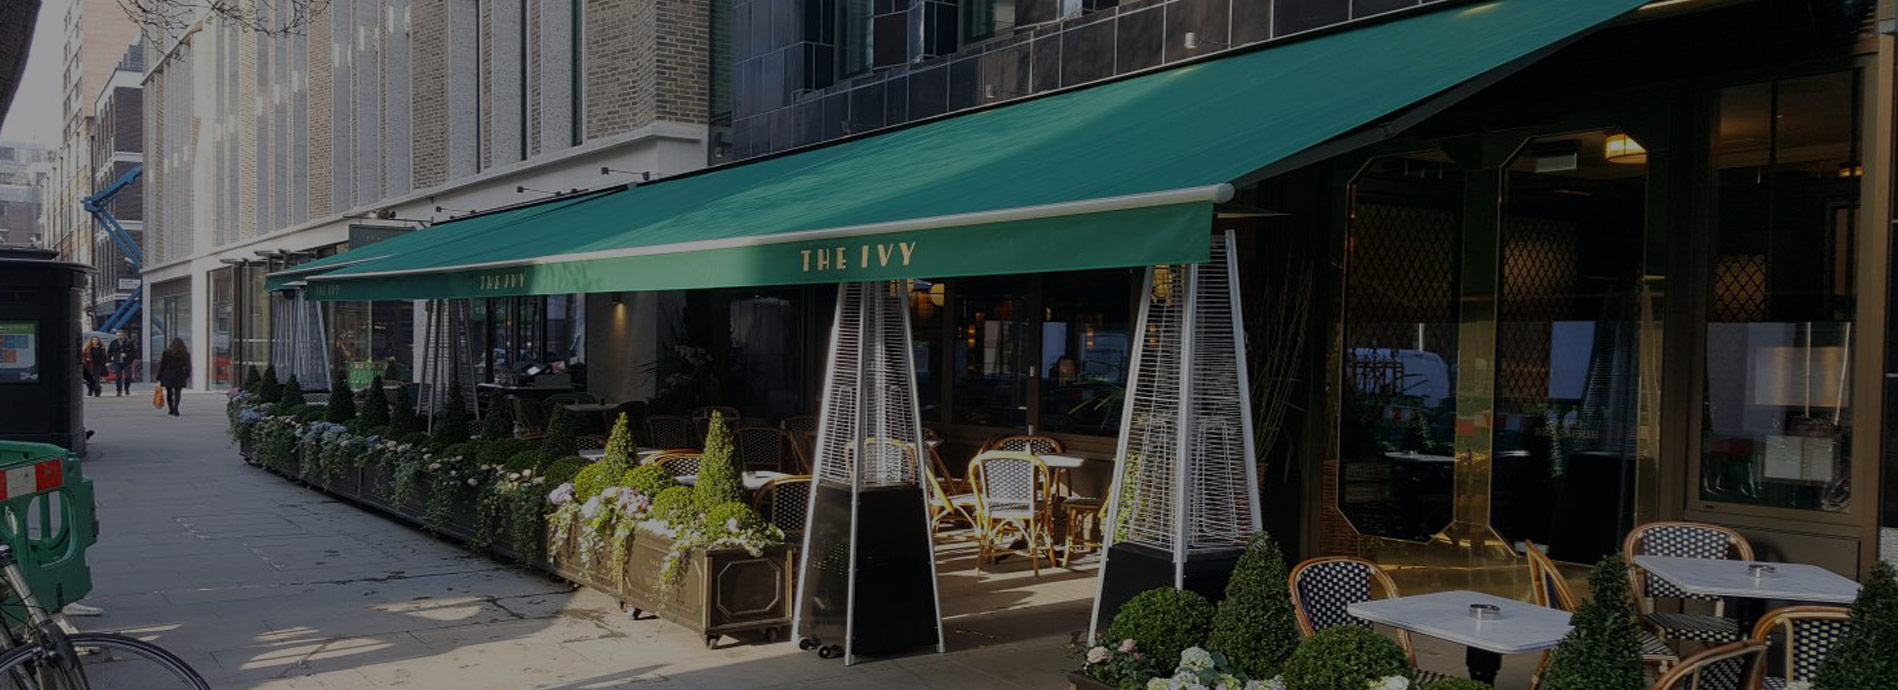 Commercial Awnings London